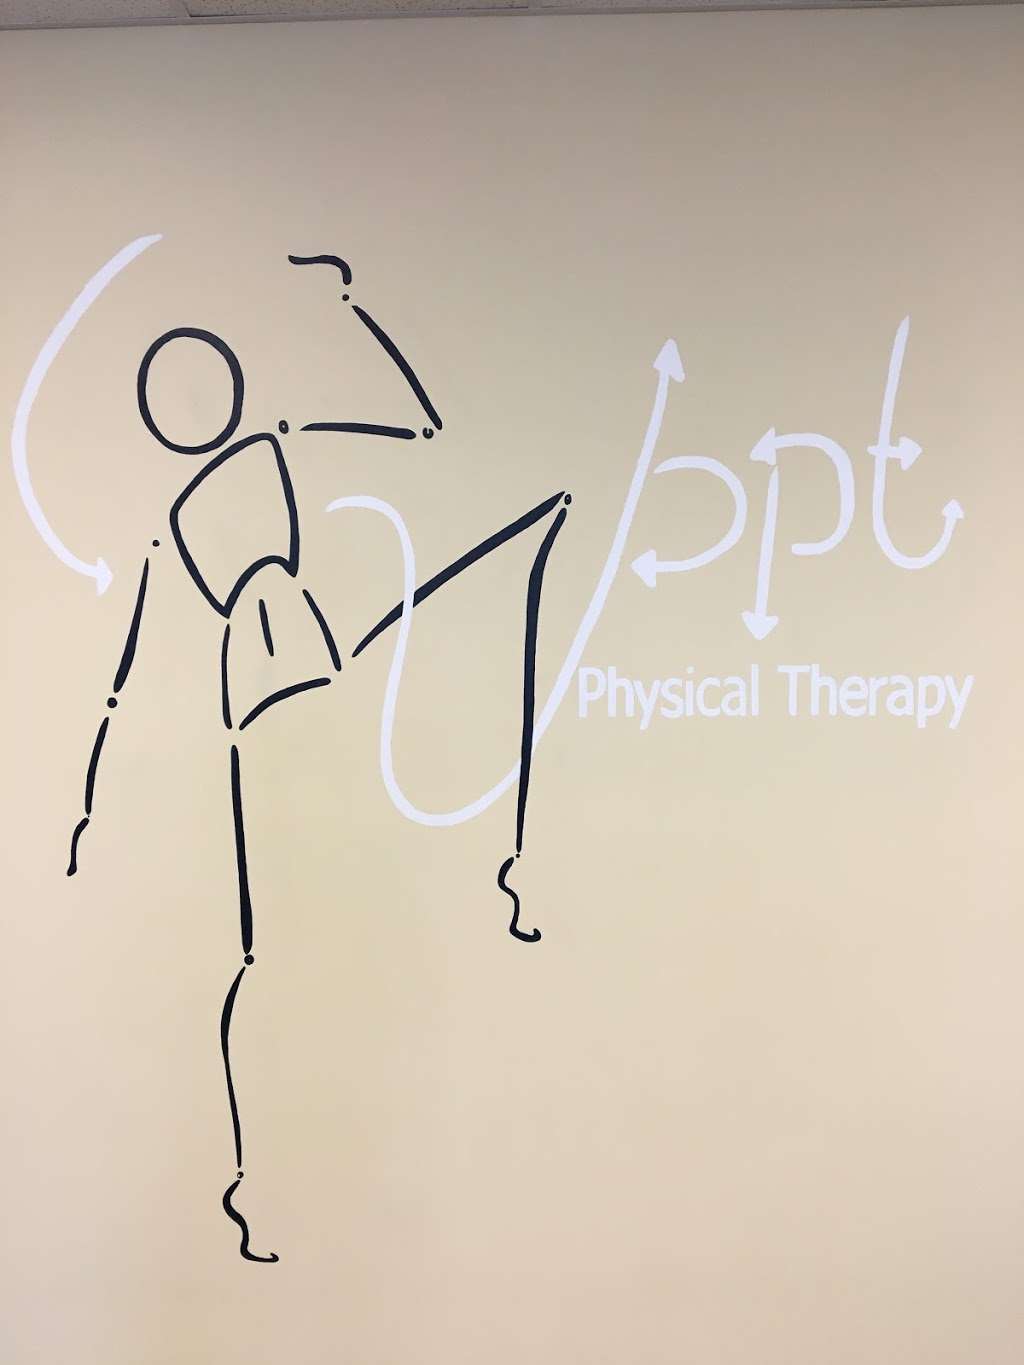 bpt Physical Therapy | 341 New Albany Rd #120, Moorestown, NJ 08057, USA | Phone: (856) 380-0887